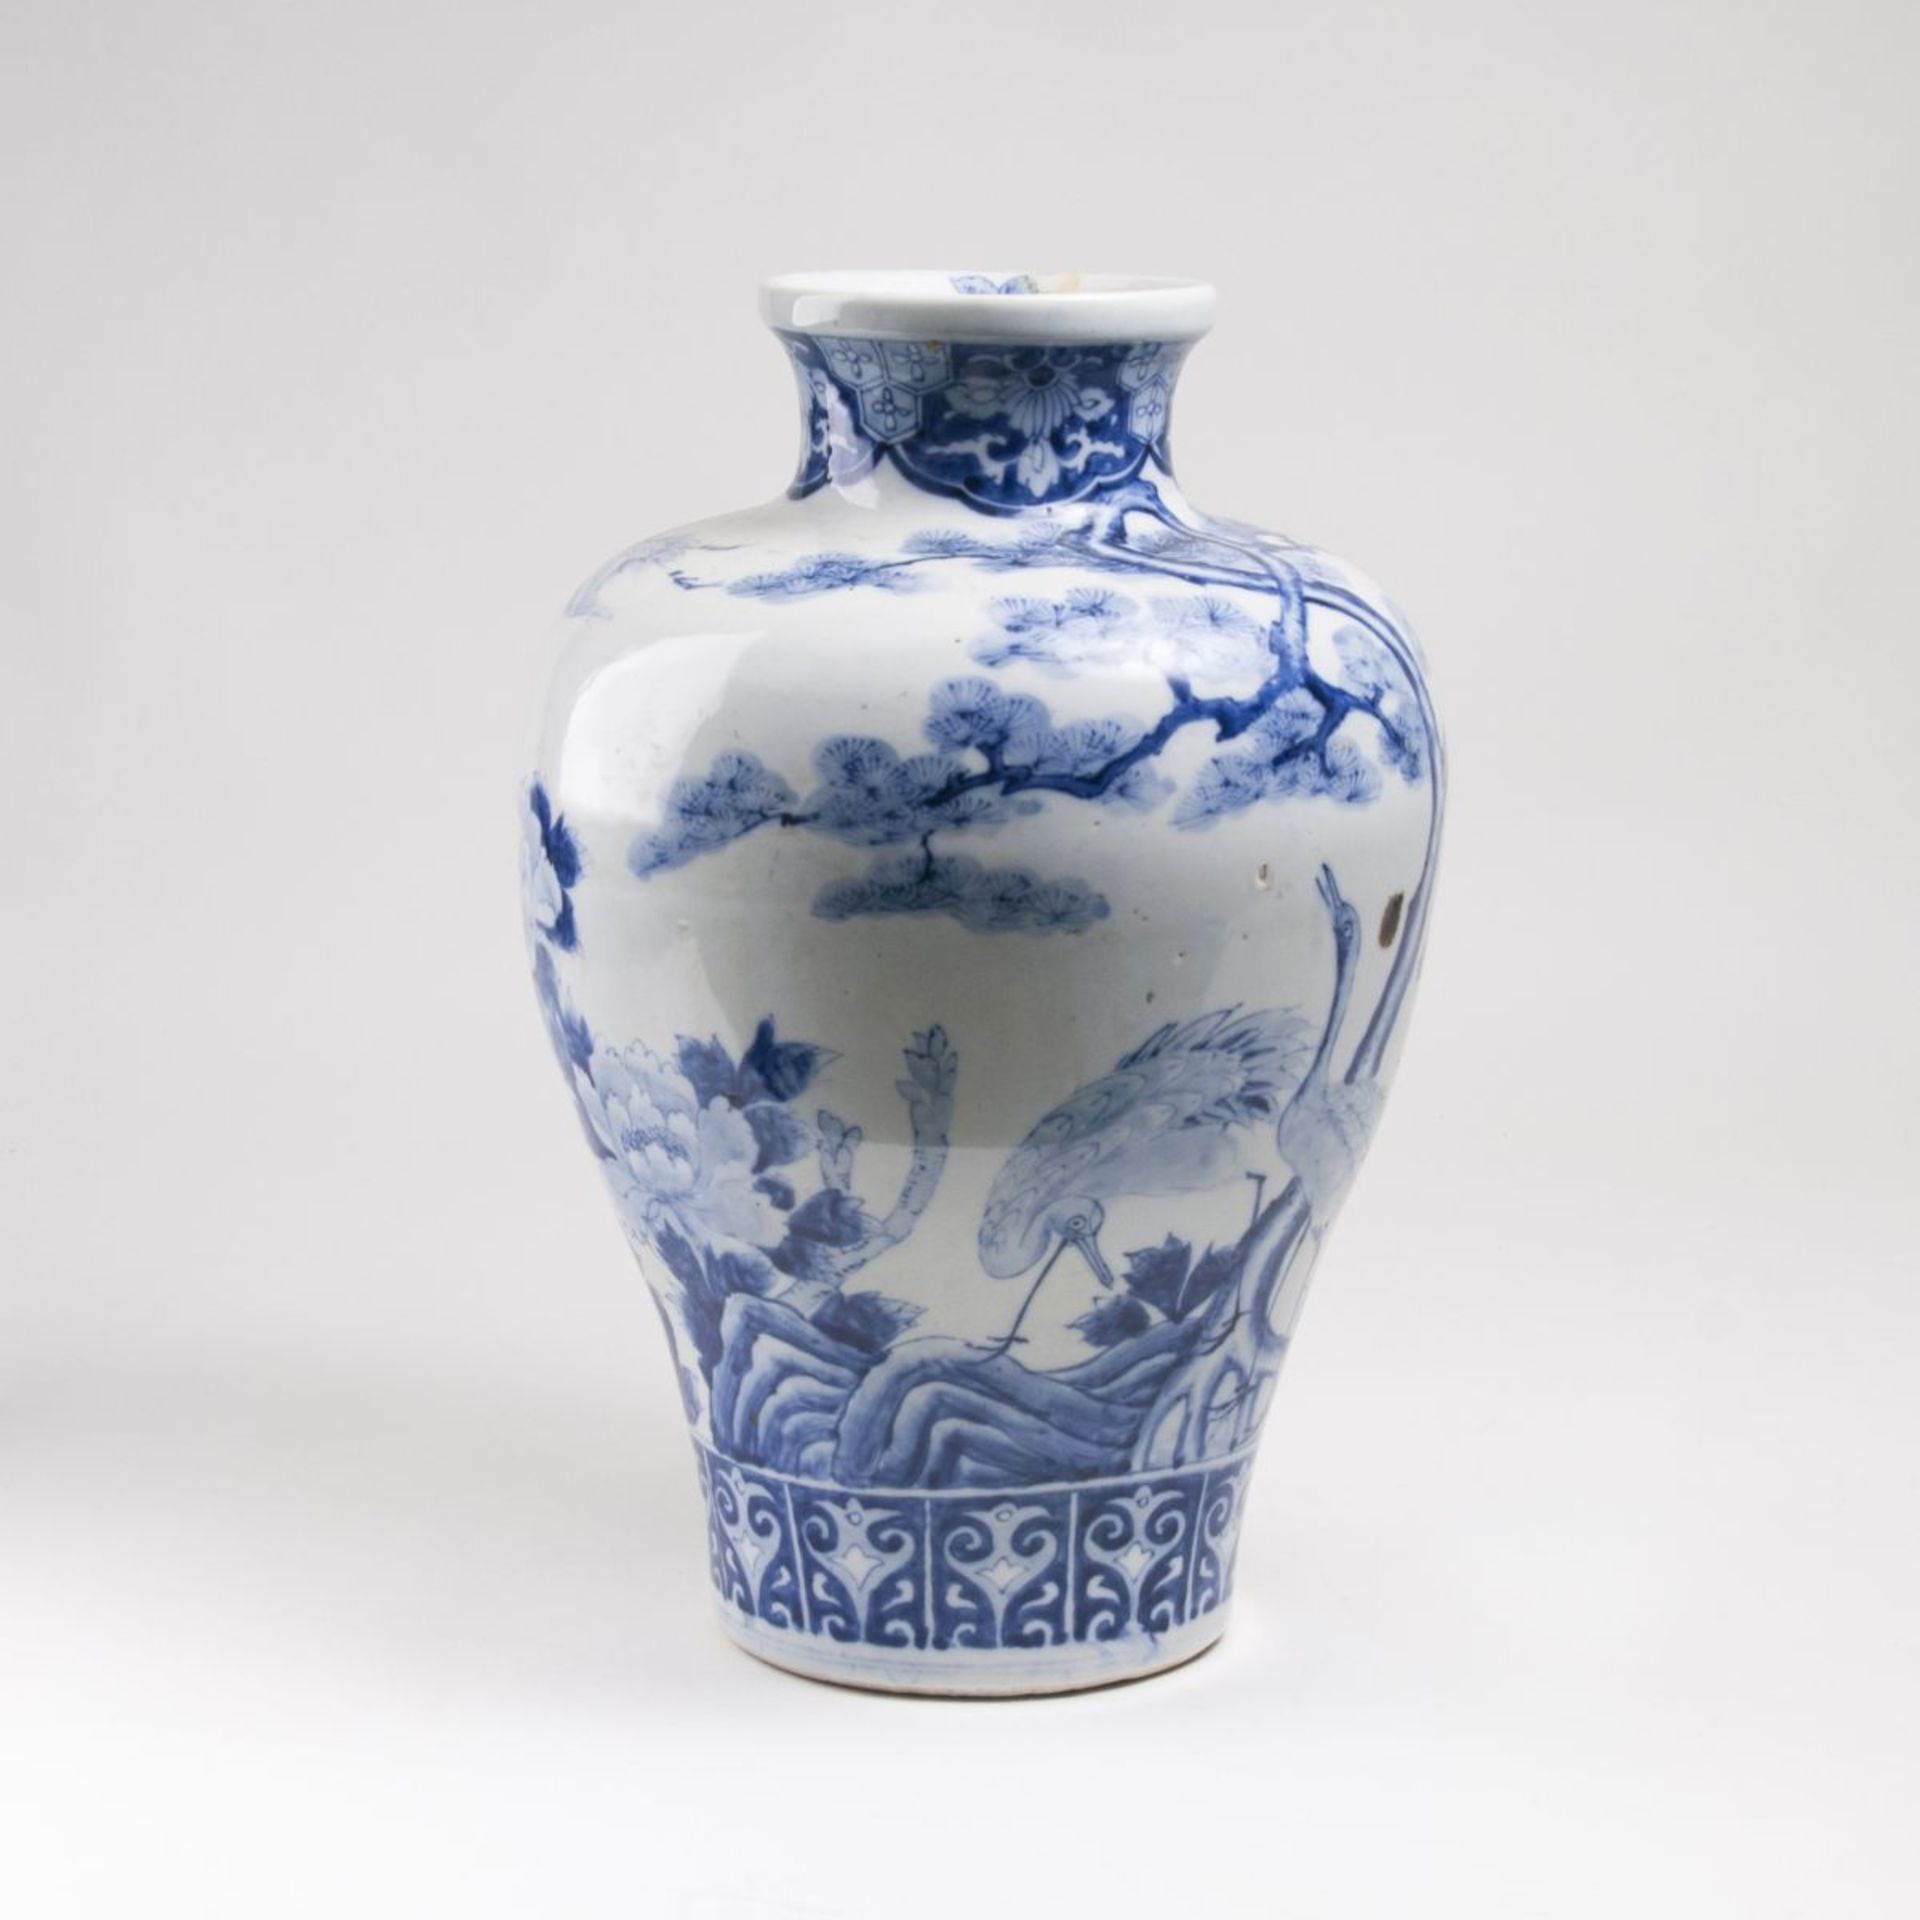 A Blue and White Vase with Cranes